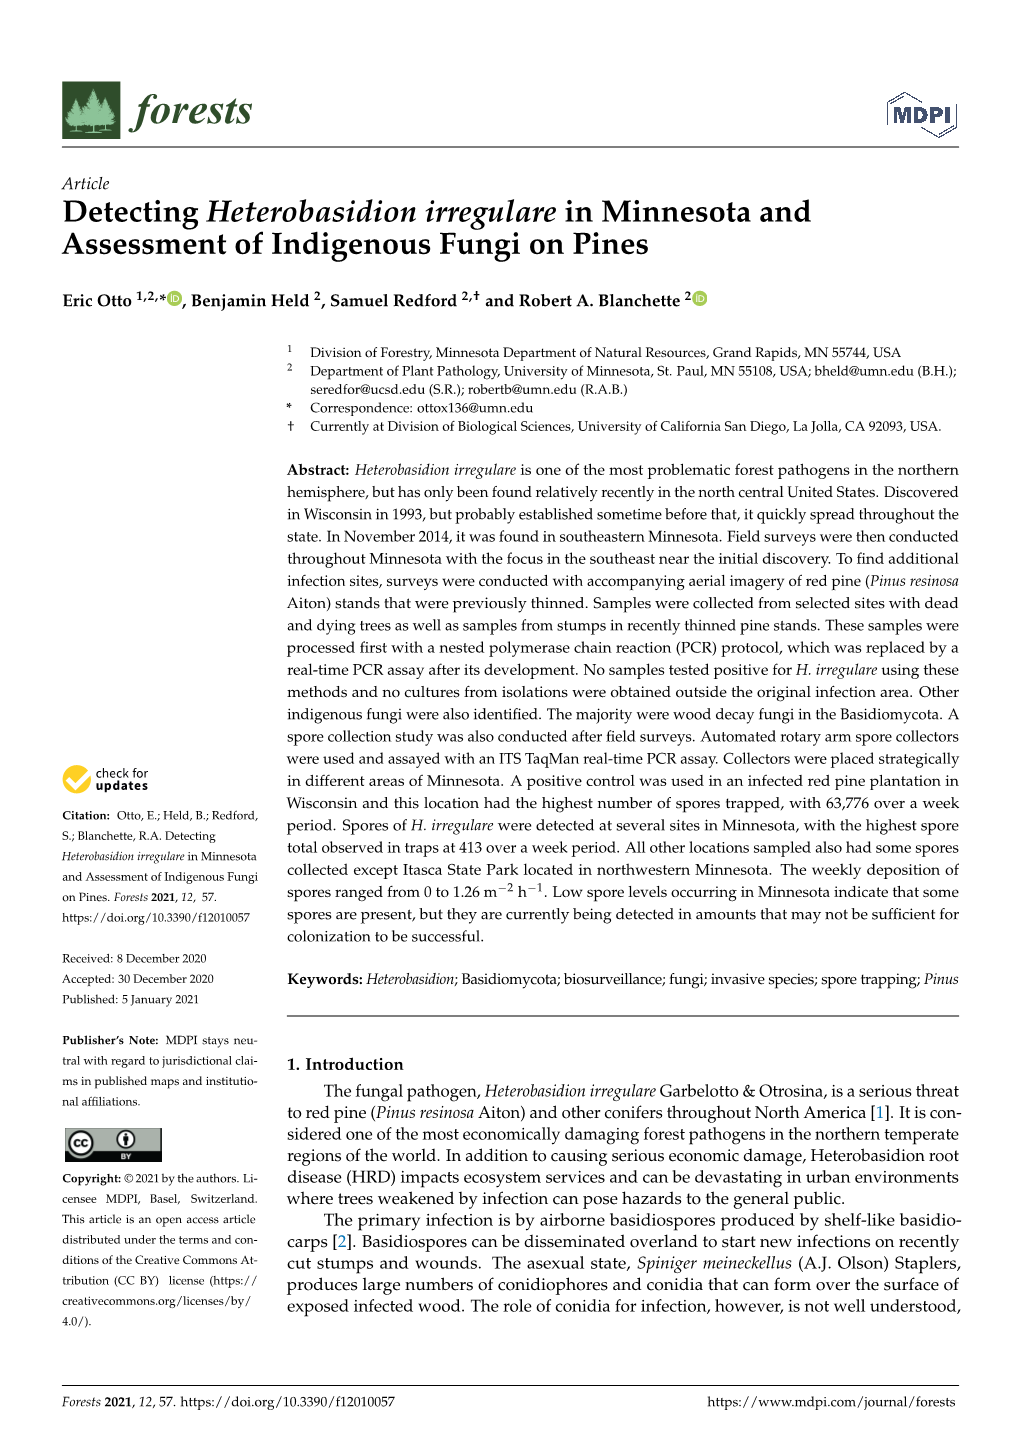 Detecting Heterobasidion Irregulare in Minnesota and Assessment of Indigenous Fungi on Pines